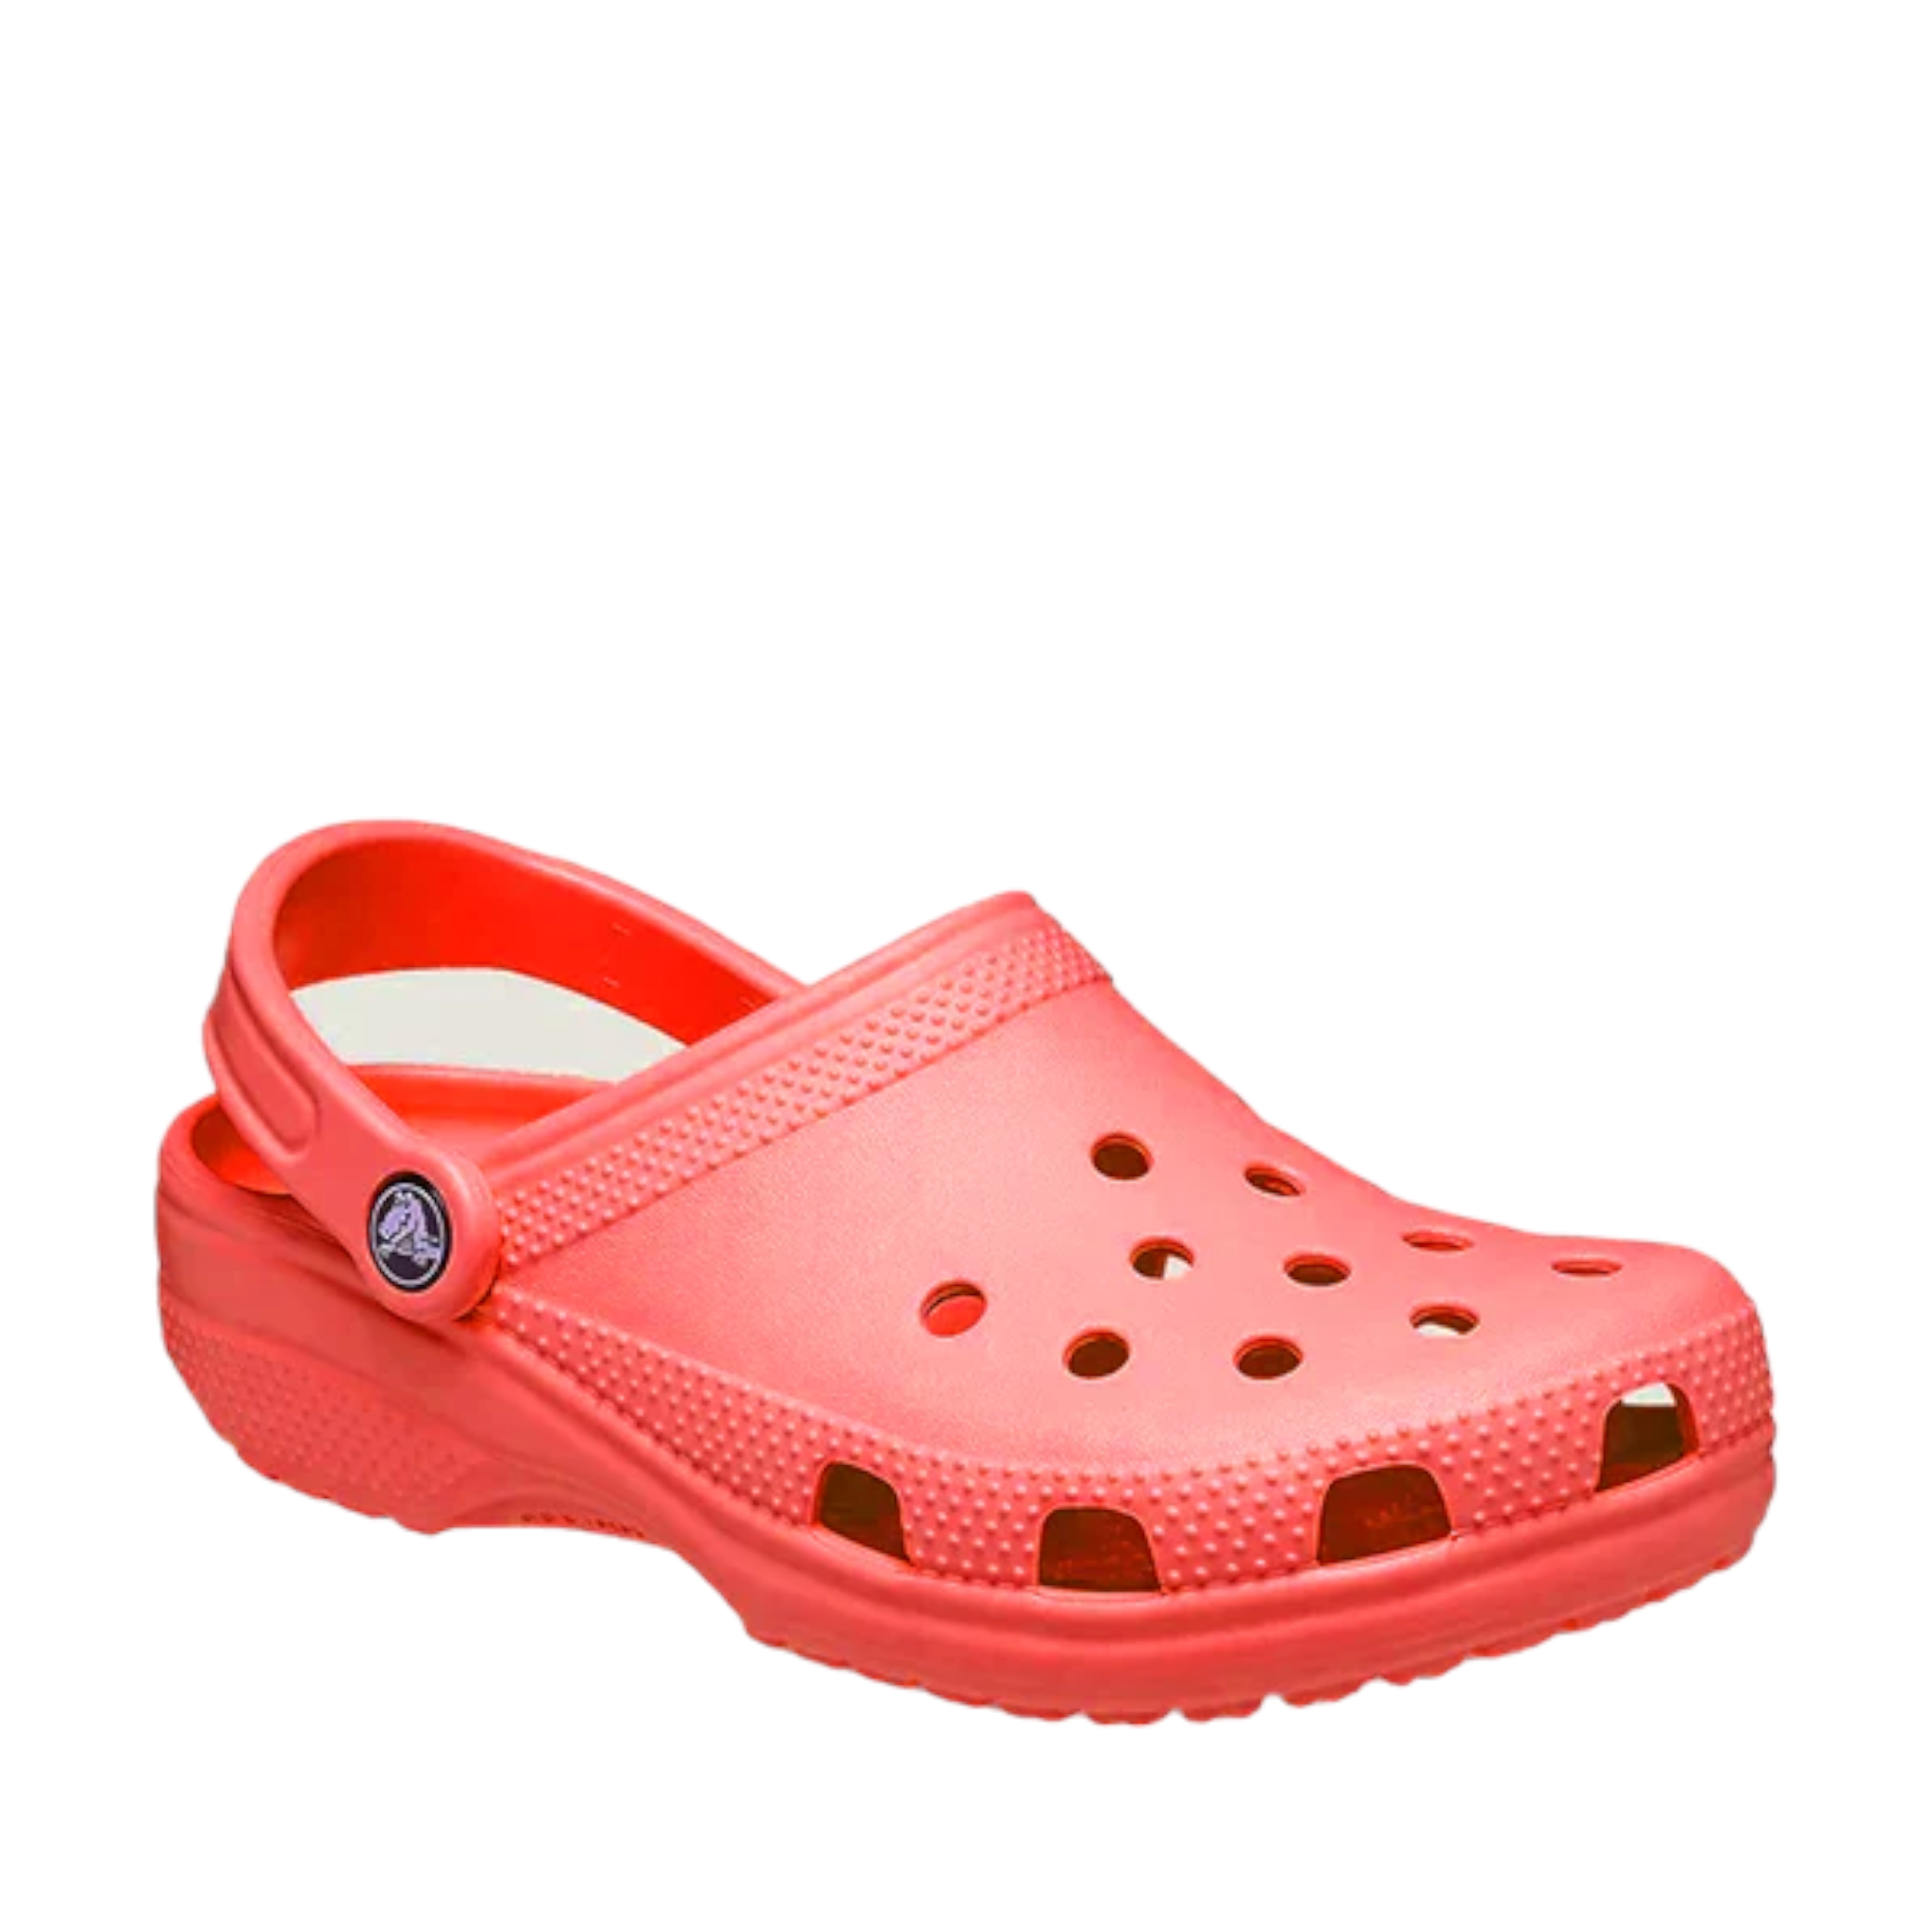 Crocs Classic Clogs online and instore with shoe&amp;me Mount Maunganui. Shop Flame Clogs